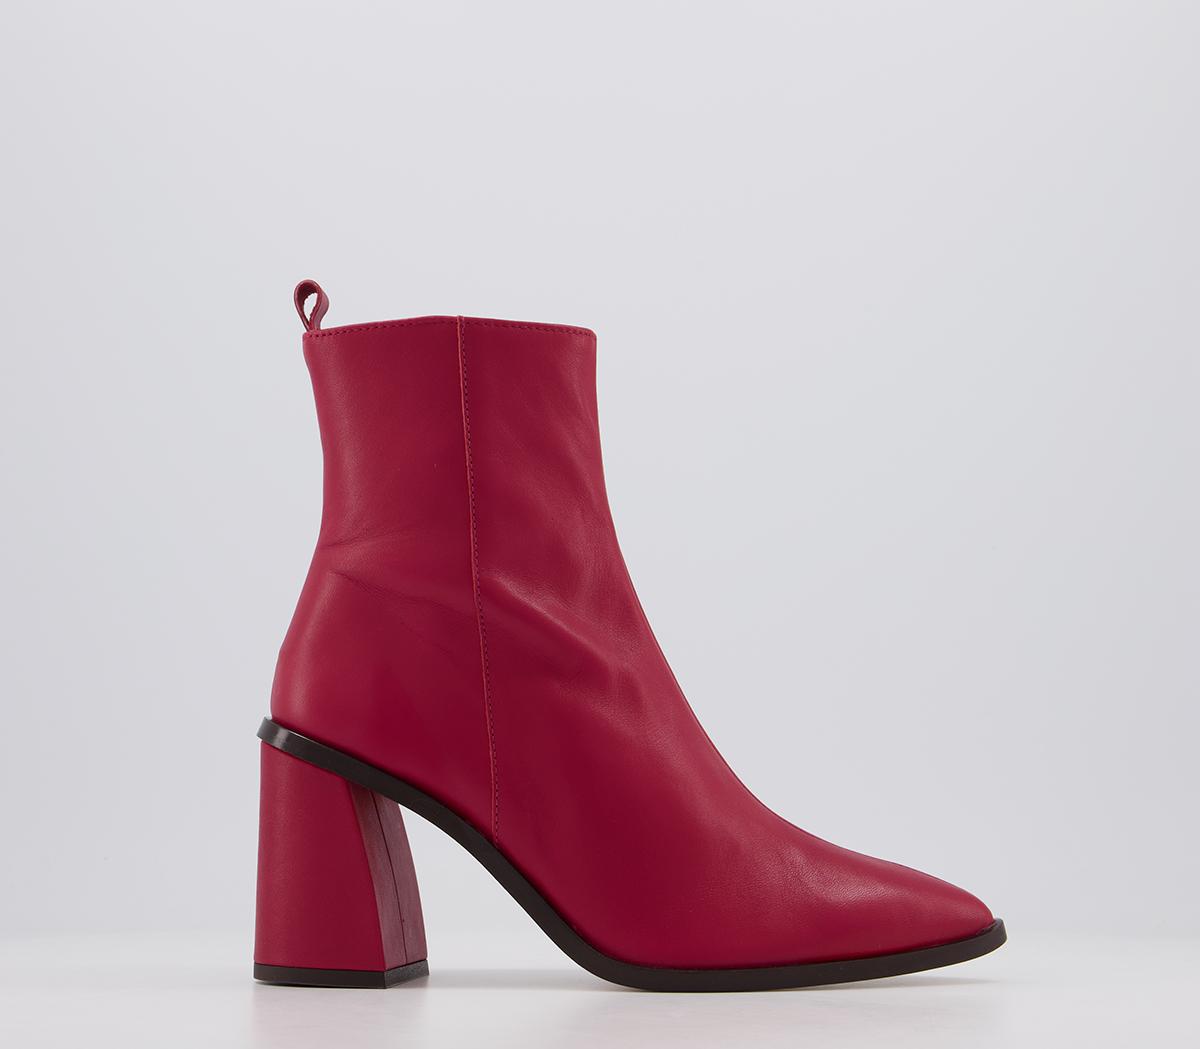 OFFICEAttraction Smart BootsRed Leather